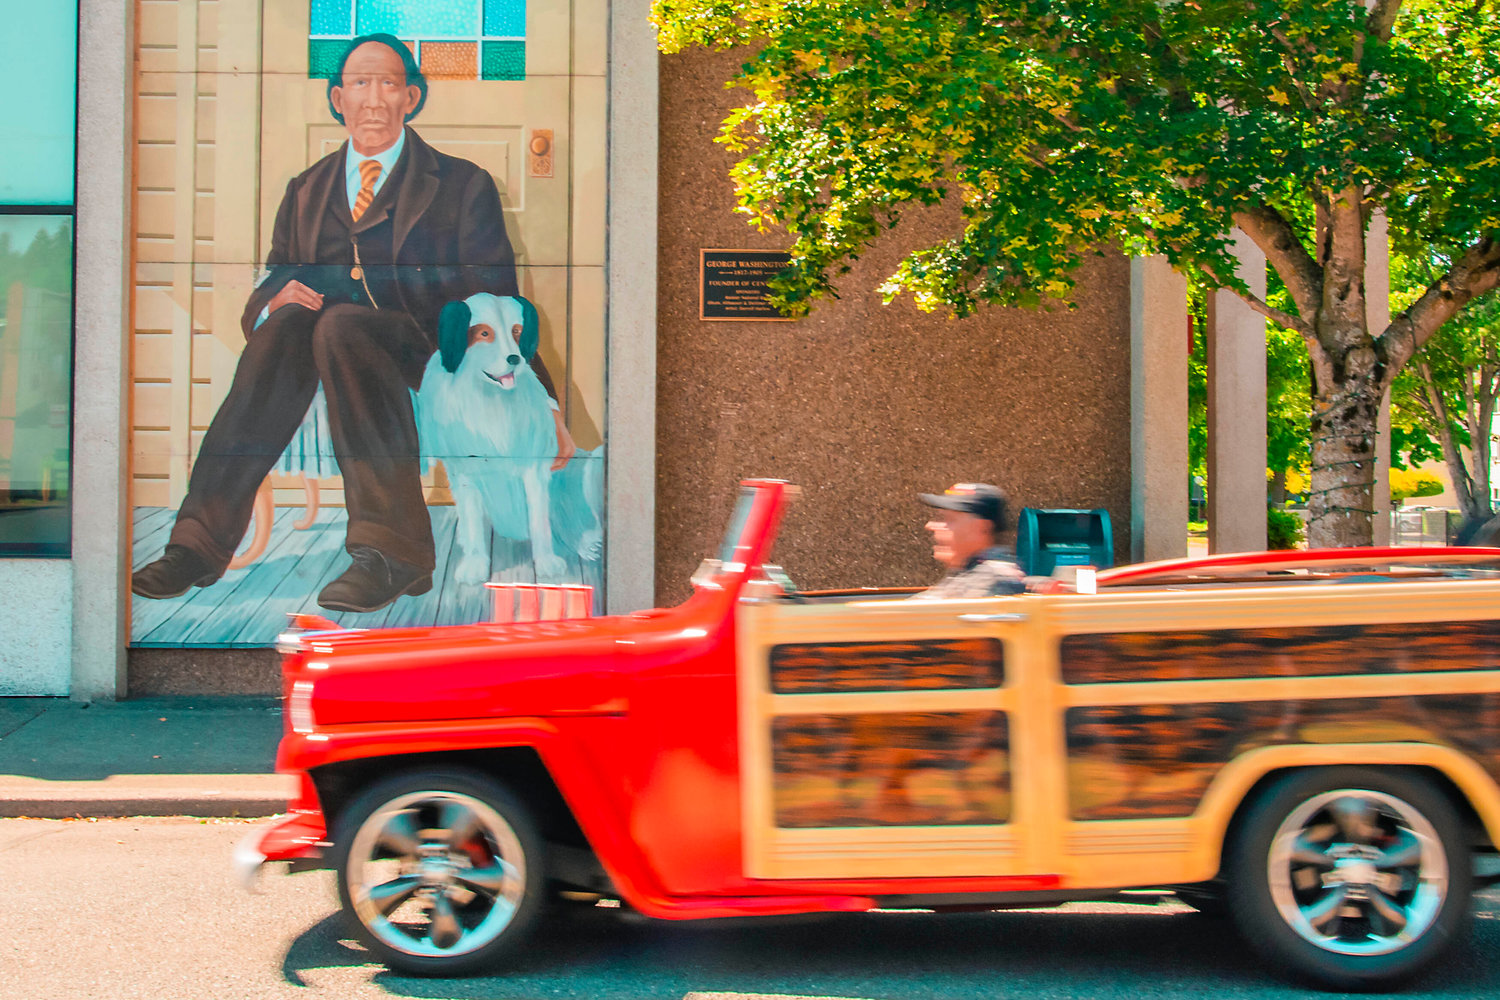 Vintage vehichles drive by a mural of George Washington in downtown Centralia following Summerfest activities for Fourth of July, Sunday afternoon.